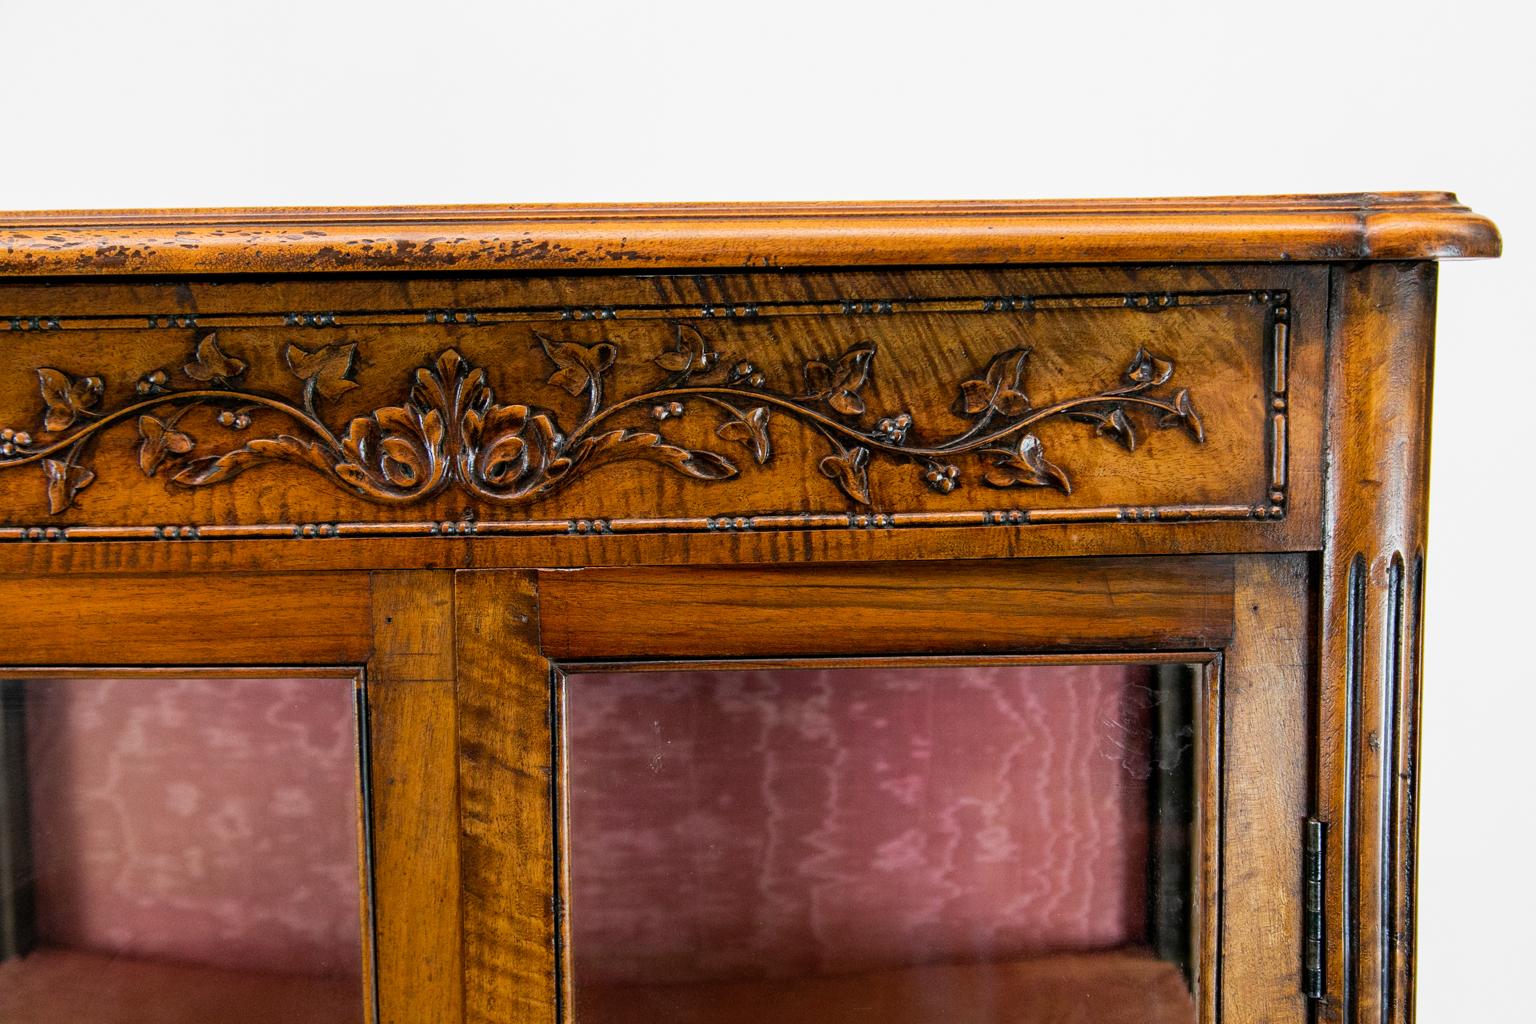 Carved French walnut display cabinet, the frieze carved with floral grapevine arabesques. The lower doors have raised panels carved with mandolins, flutes, and branches. The apron has carved molding with a floral center. Diapering stiles are fluted